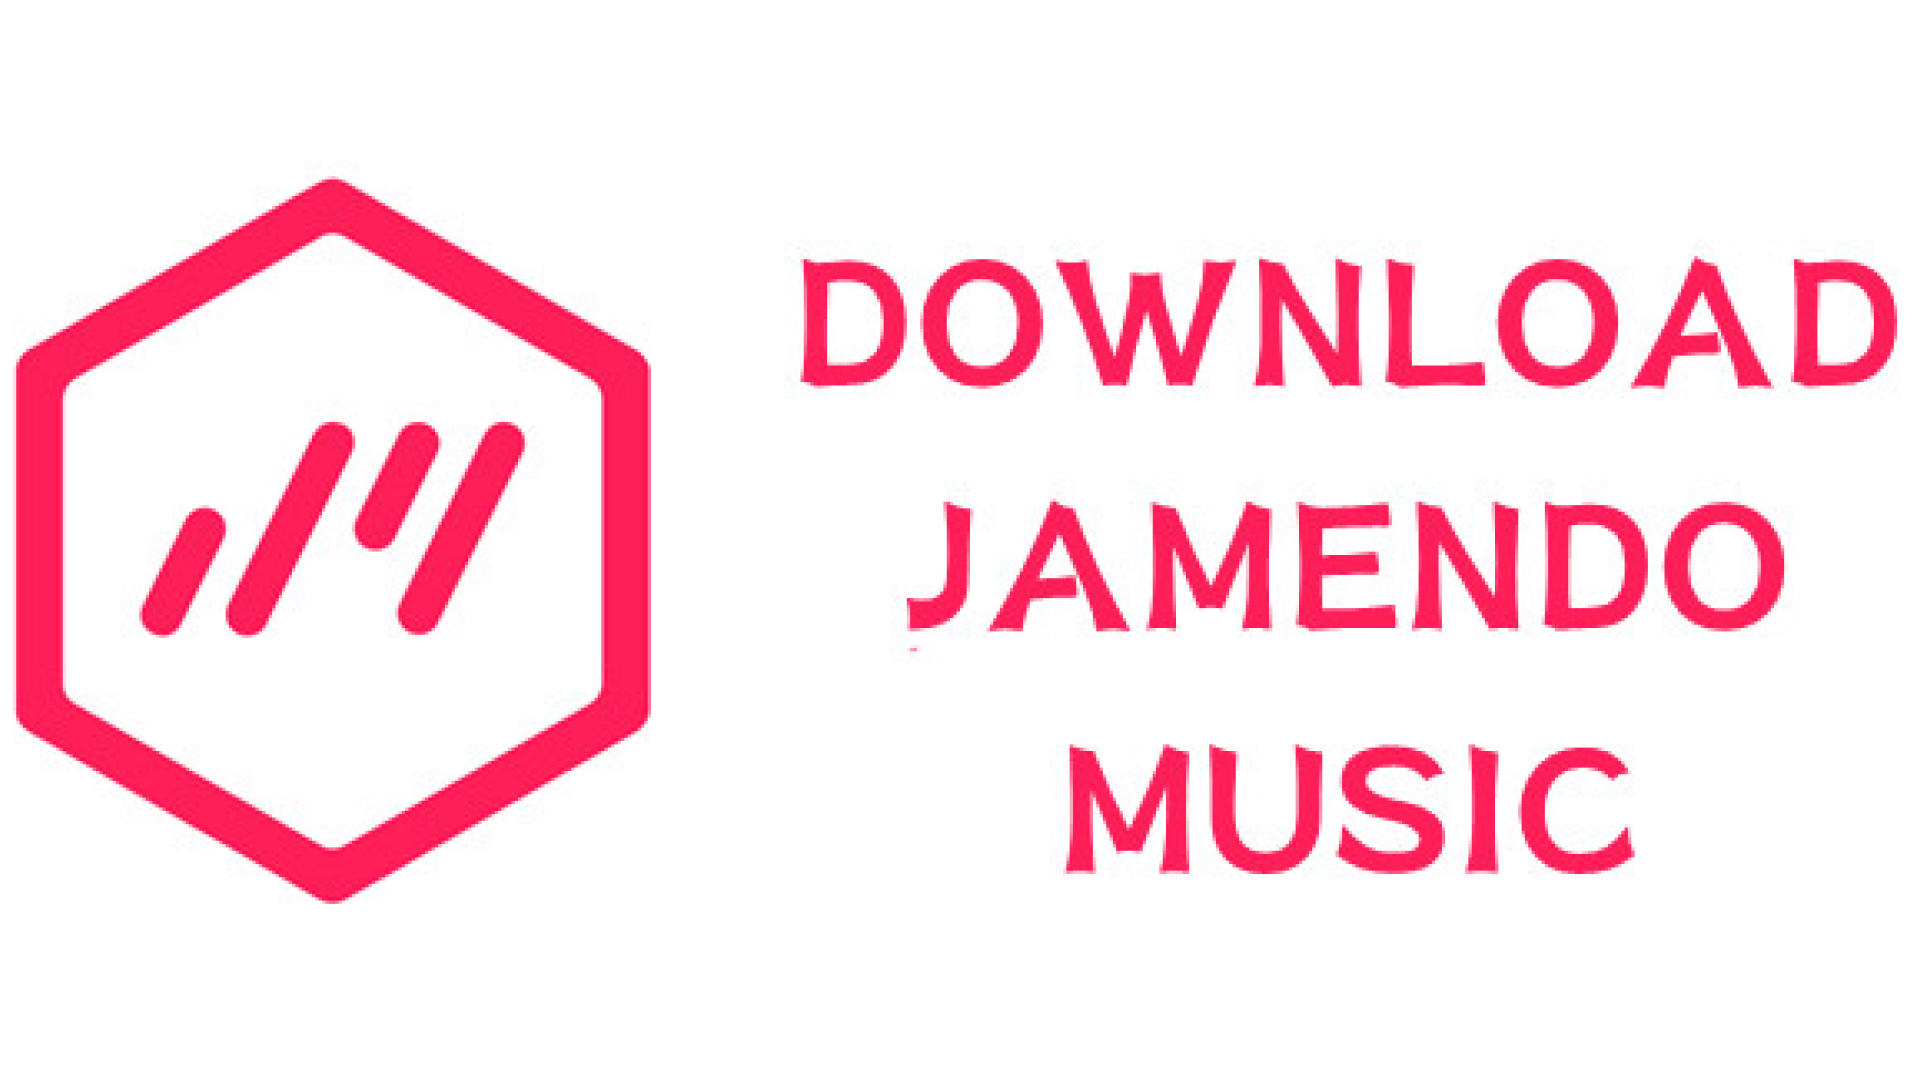 [Solved!] How to Download Jamendo Music?